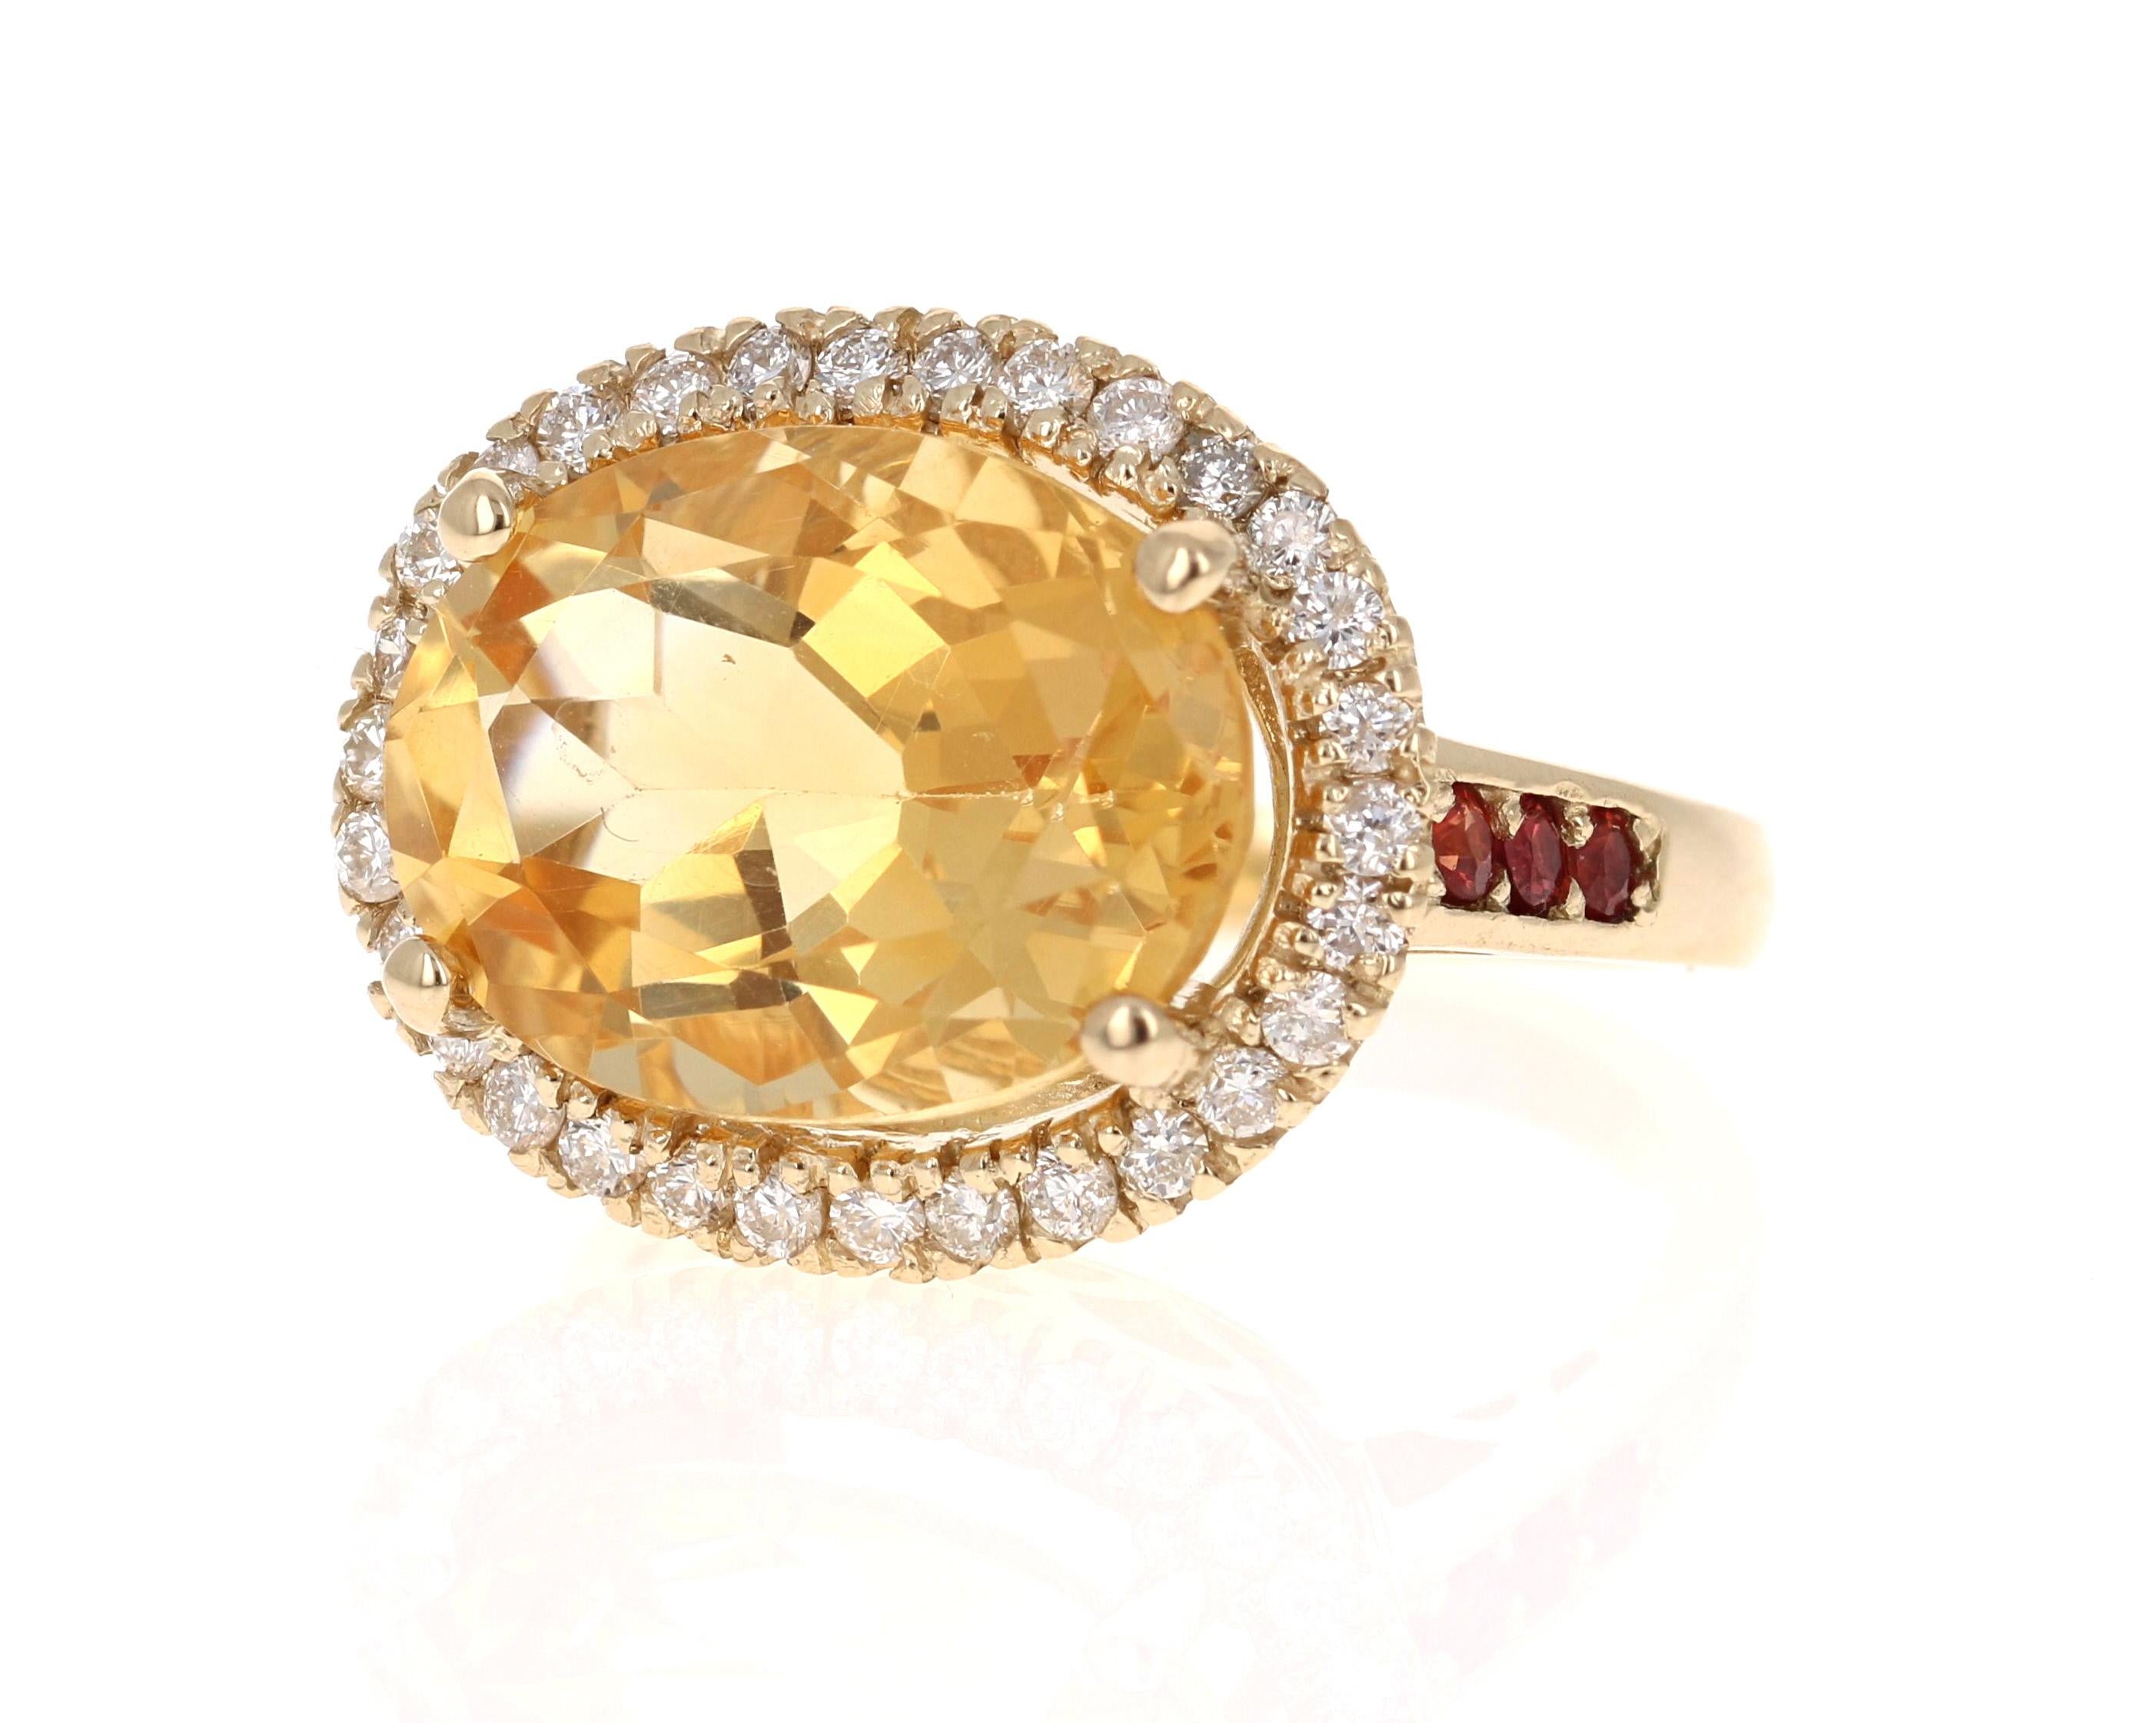 A Stunning and uniquely designed beauty to say the least! 

This magnificent ring has a bold Oval Cut Citrine that is blazing yellow! It weighs 8.89 Carats and is surrounded by a beautiful halo of 30 Round Cut Diamonds that weigh 0.57 Carats.